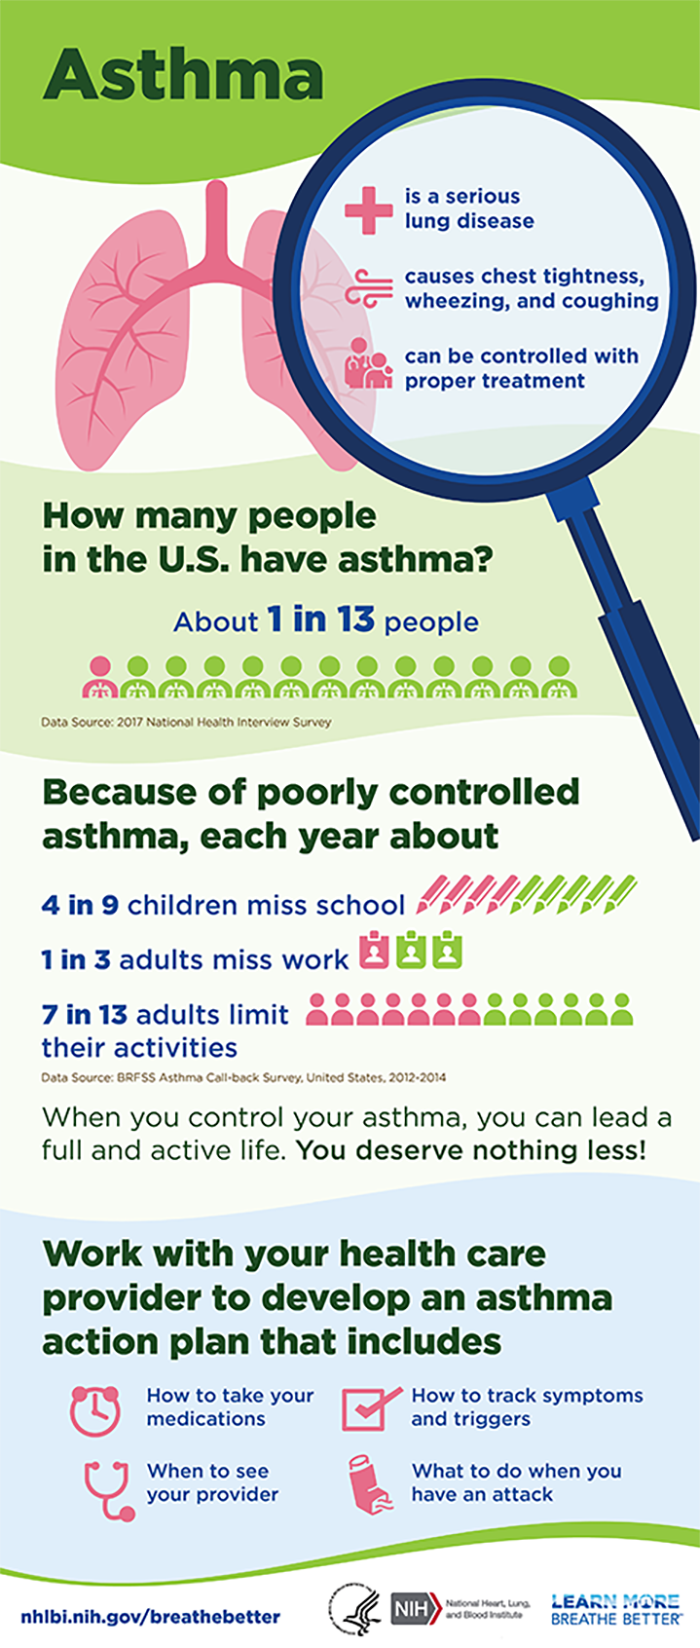 Infographic depicts various facts about asthma and how to develop an asthma action plan. It states that 1 in 13 people have asthma, 4 in 9 children miss school days because of asthma, 1 in 3 adults miss work, and 7 in 13 adults limit their own activities.